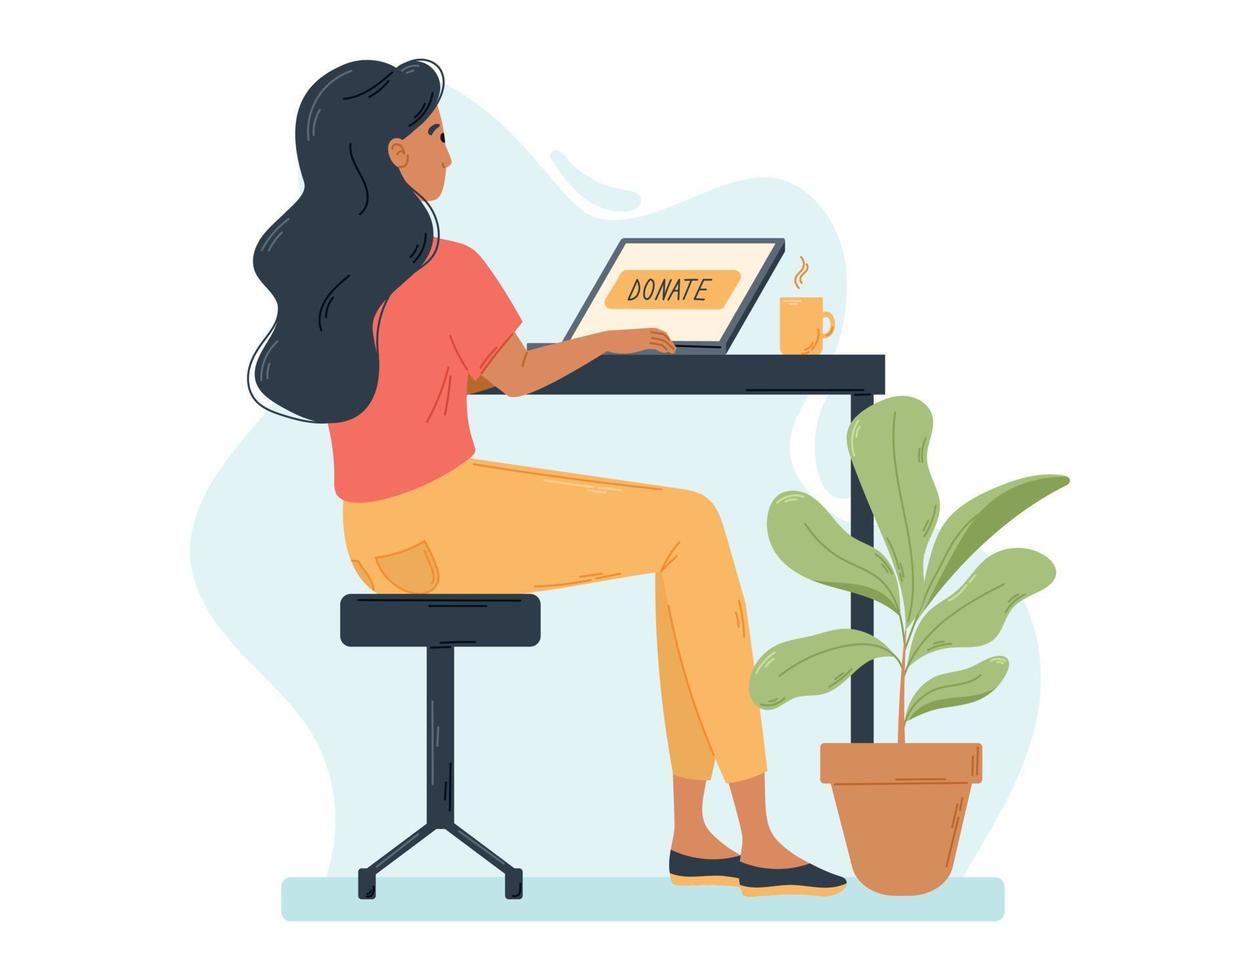 Young Flat Woman sitting at a desk with a laptop and cup of tea or coffee. Donation online. Cartoon design element, working or studying at home office. vector